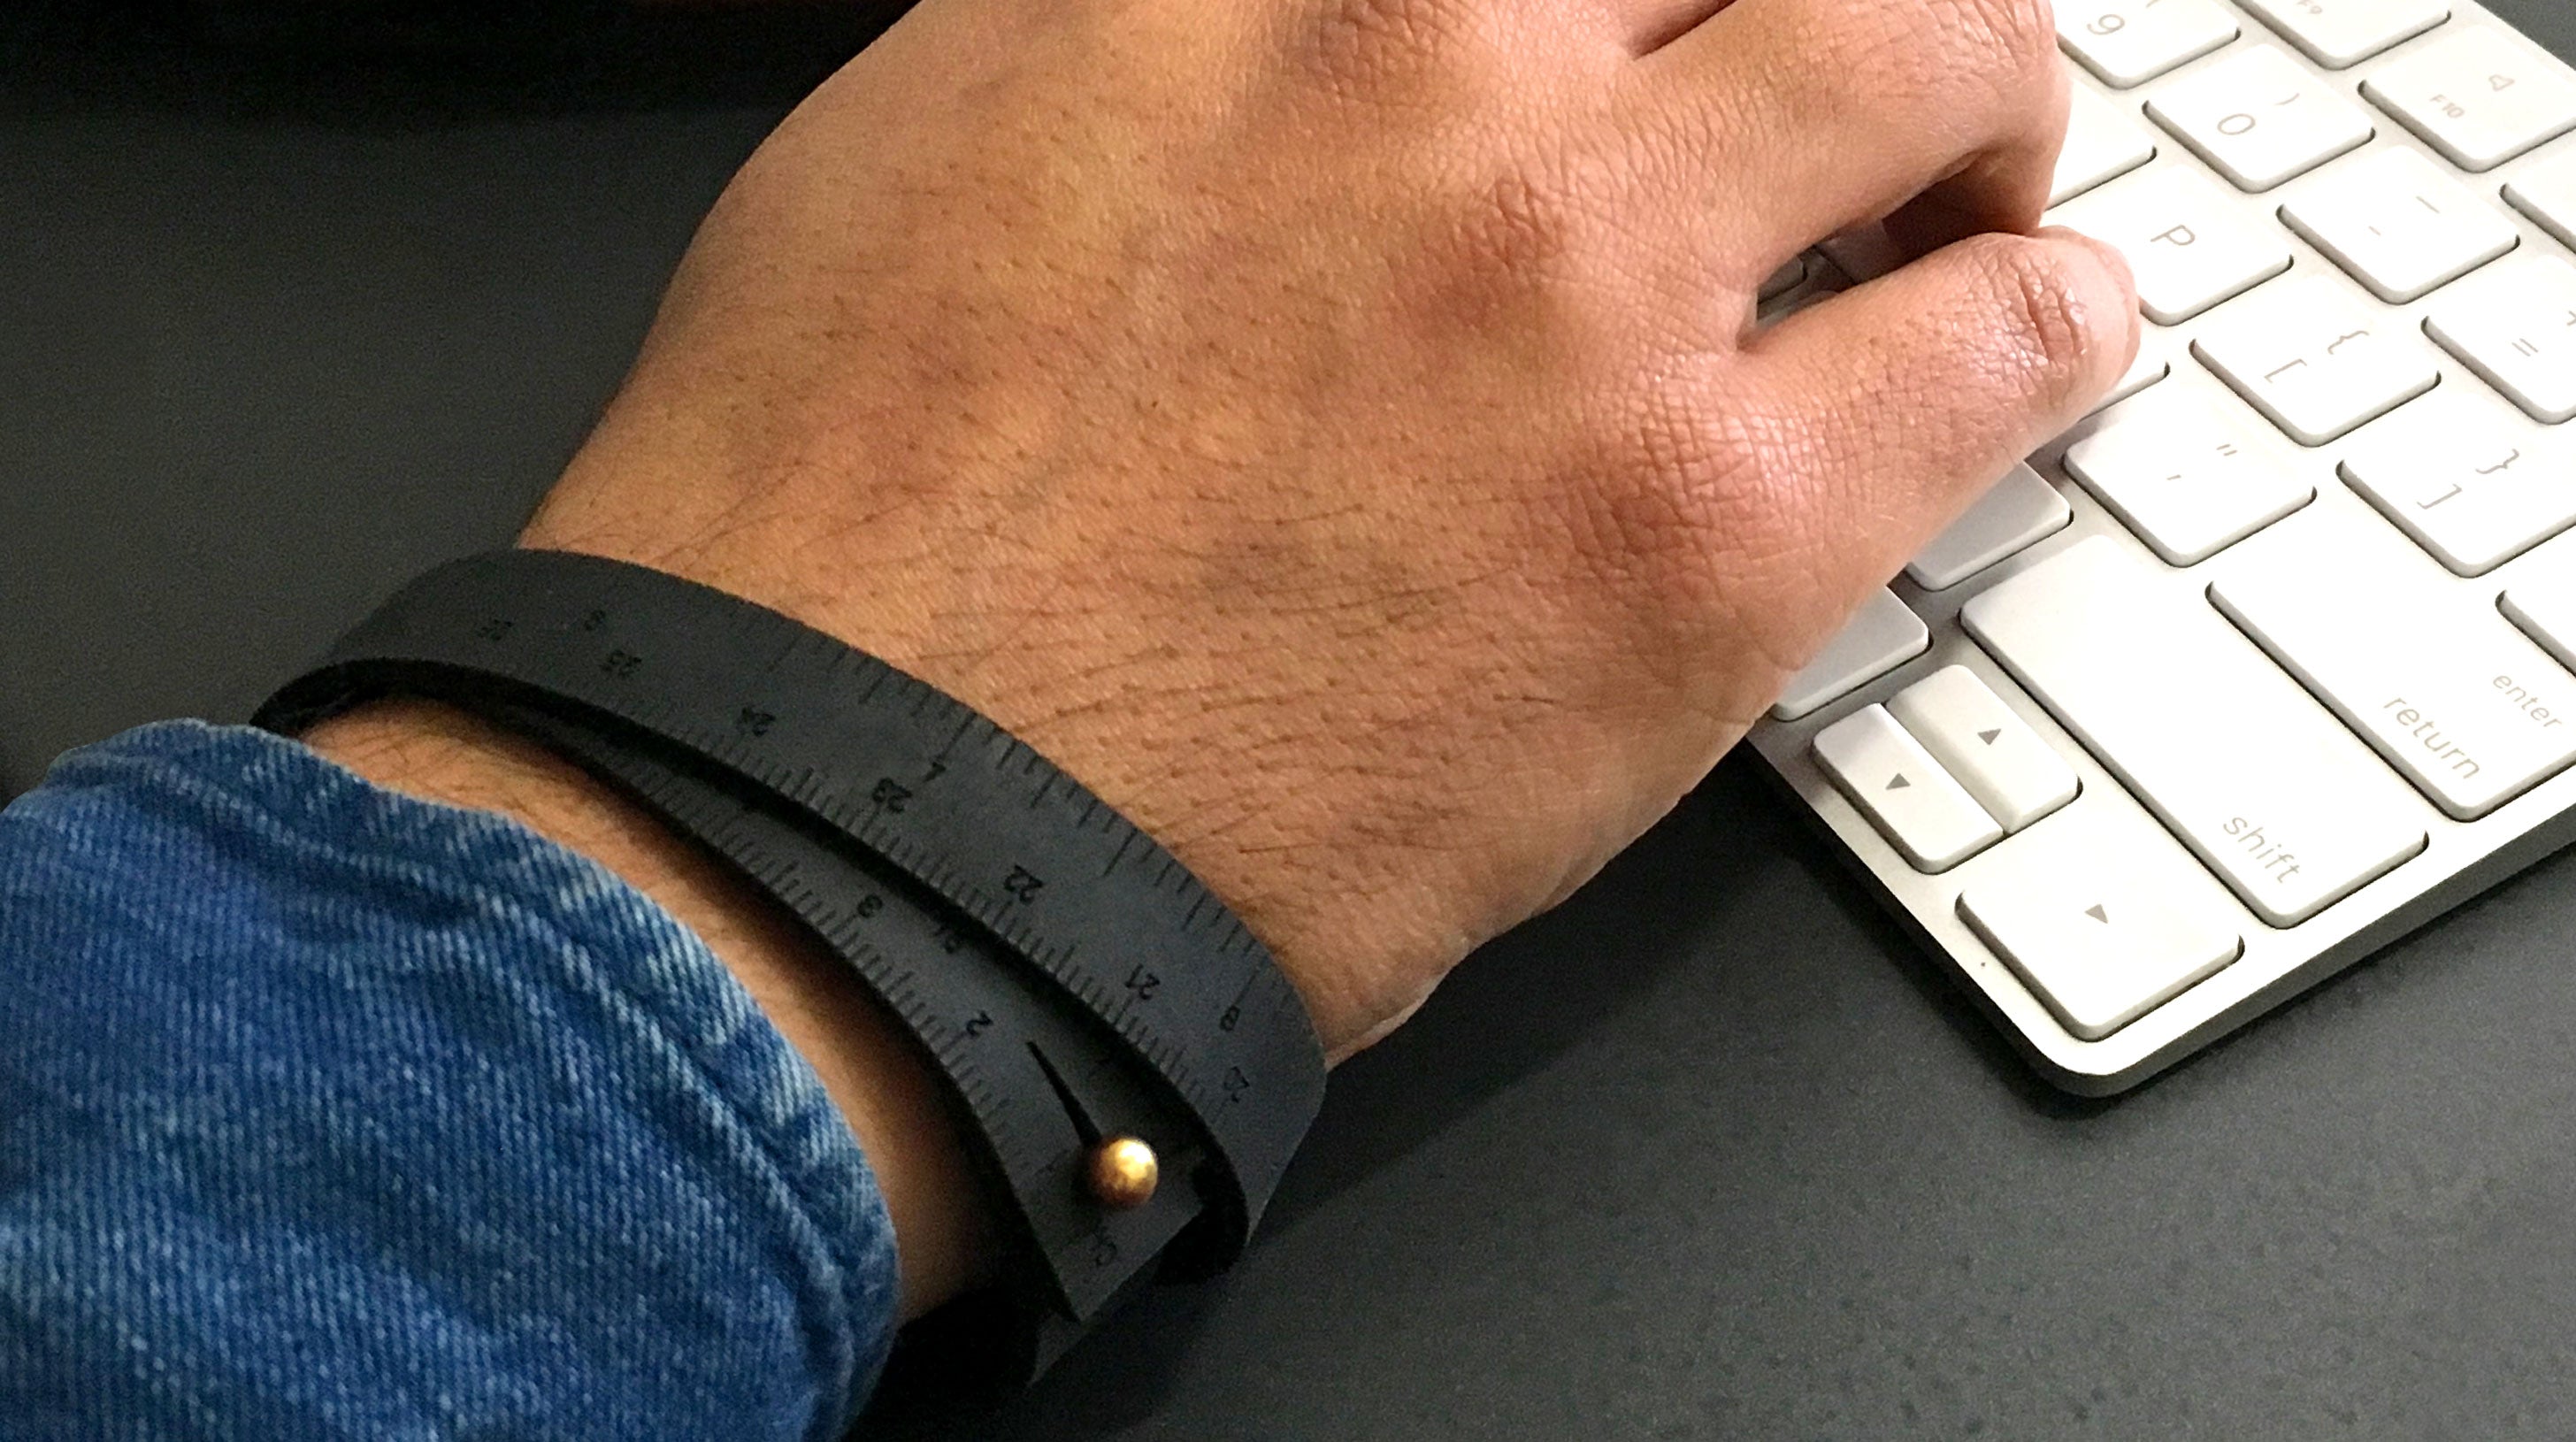 A photo of a black wrist ruler with engraved measurements on a man's wrist at the computer keyboard